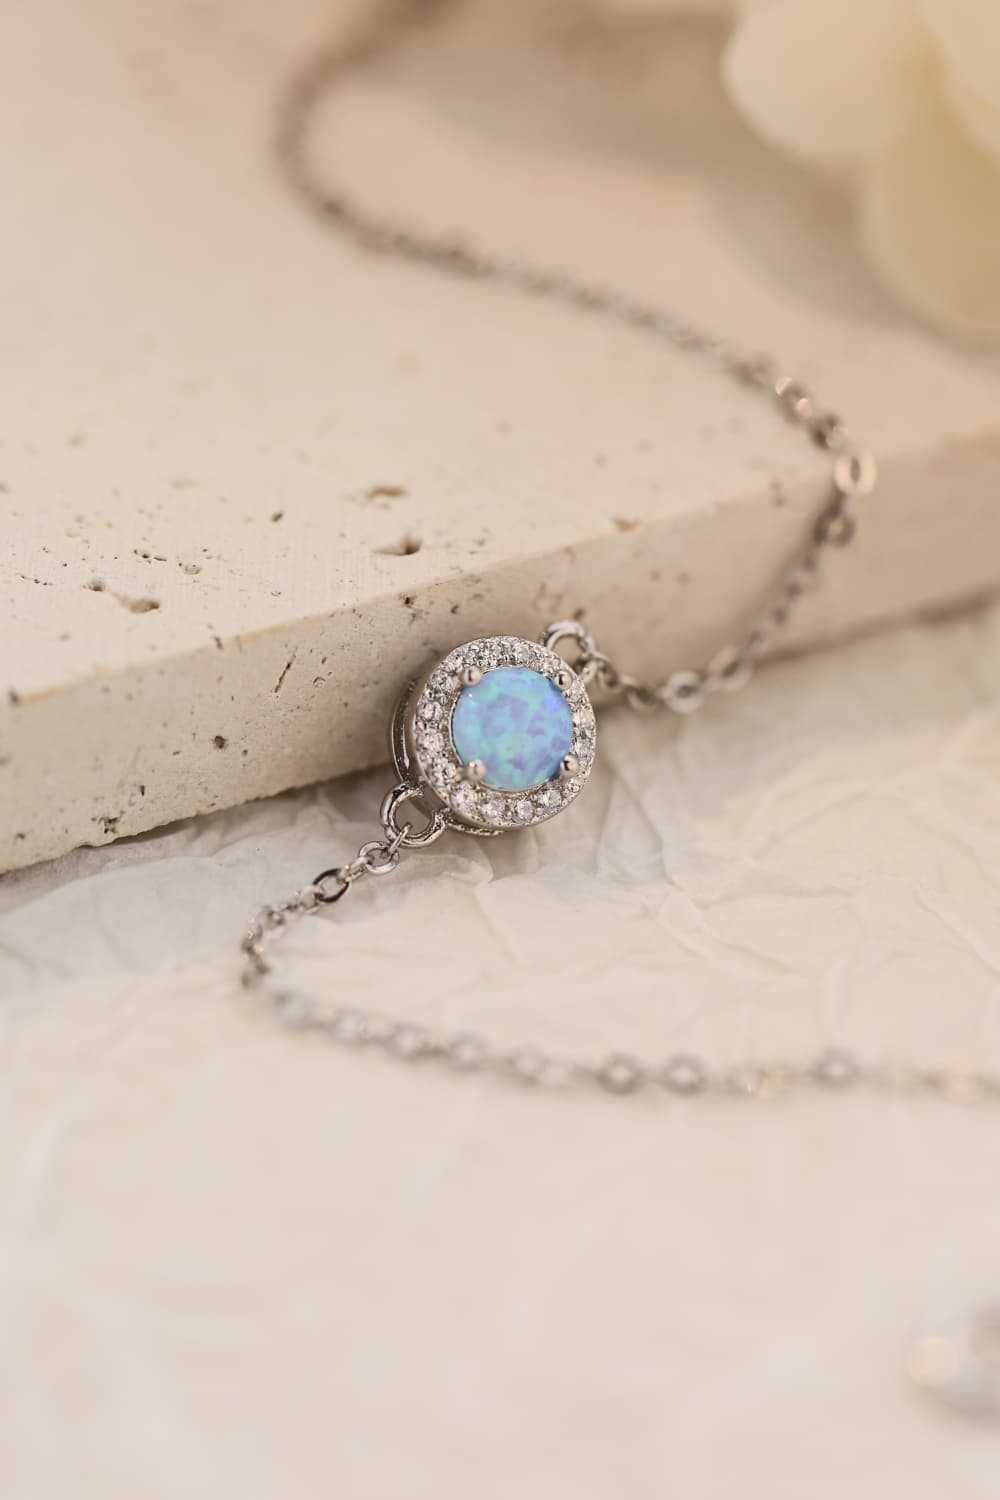 Love You Too Much Opal Bracelet - Radiate the Colors of Love with this Exquisite Piece - Express Your Affection in a Timeless Way - Guy Christopher